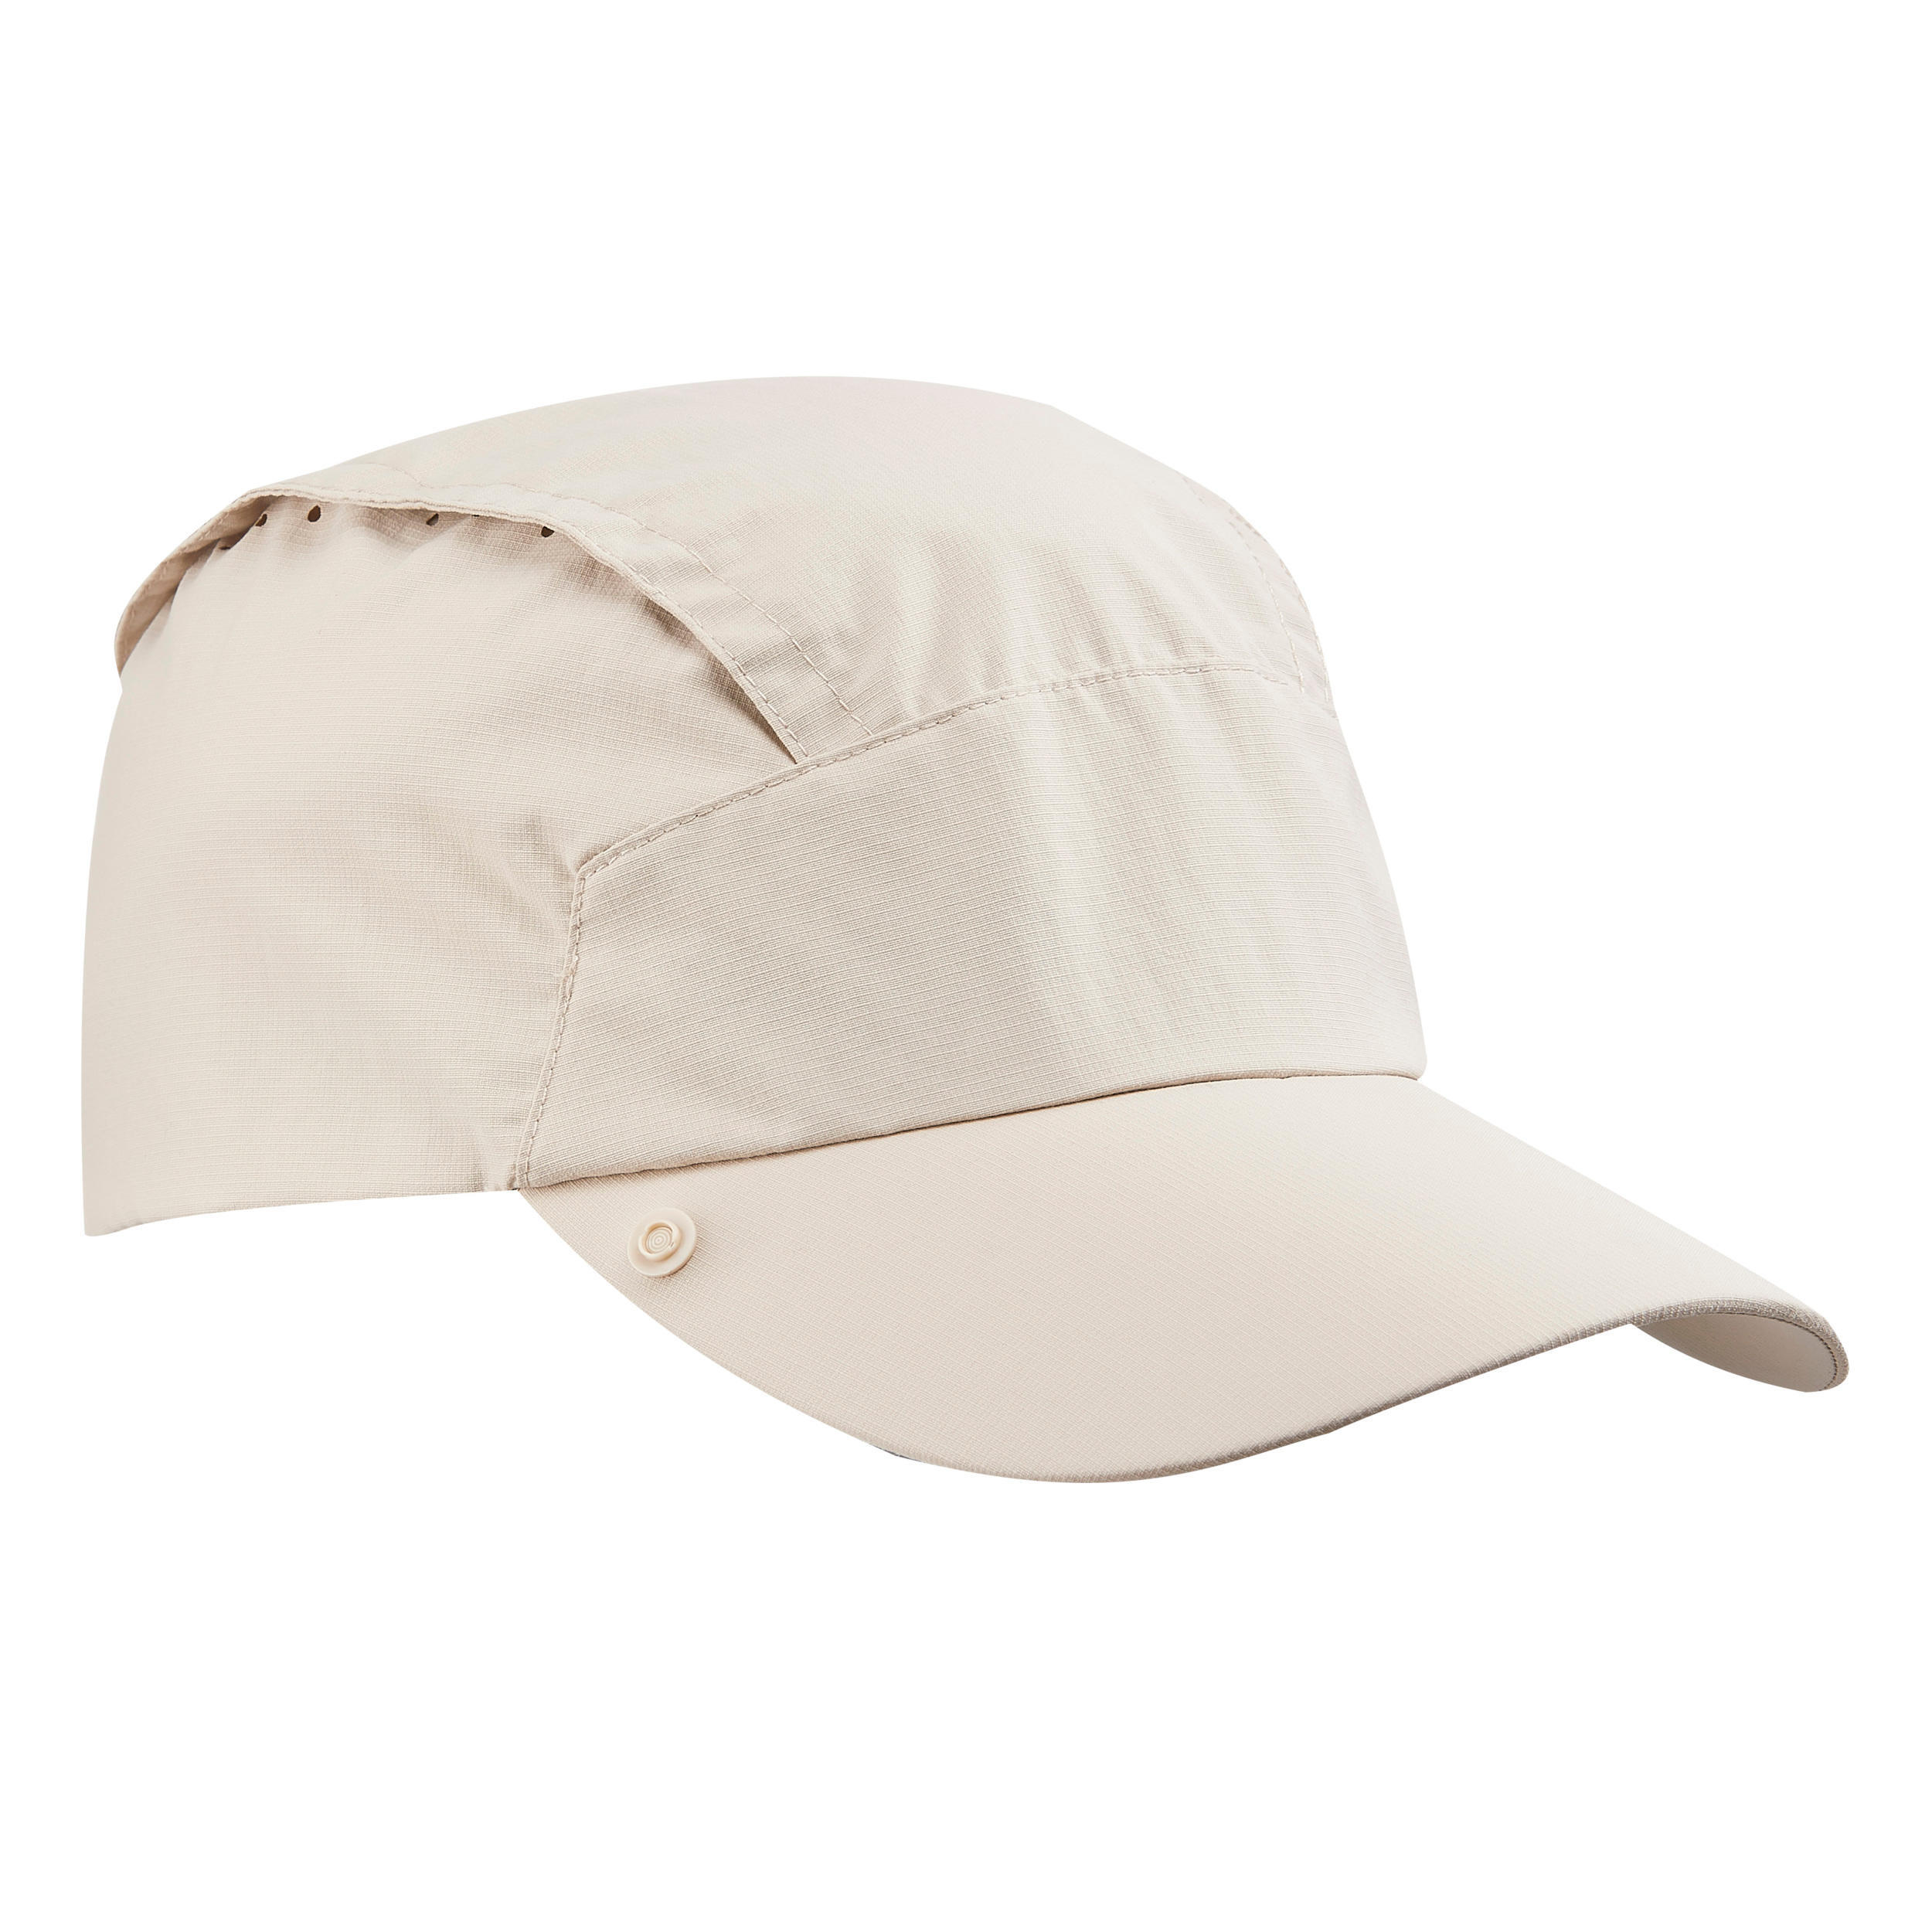 Anti-UV Cap with Removable Neck Protection - Beige 2/7